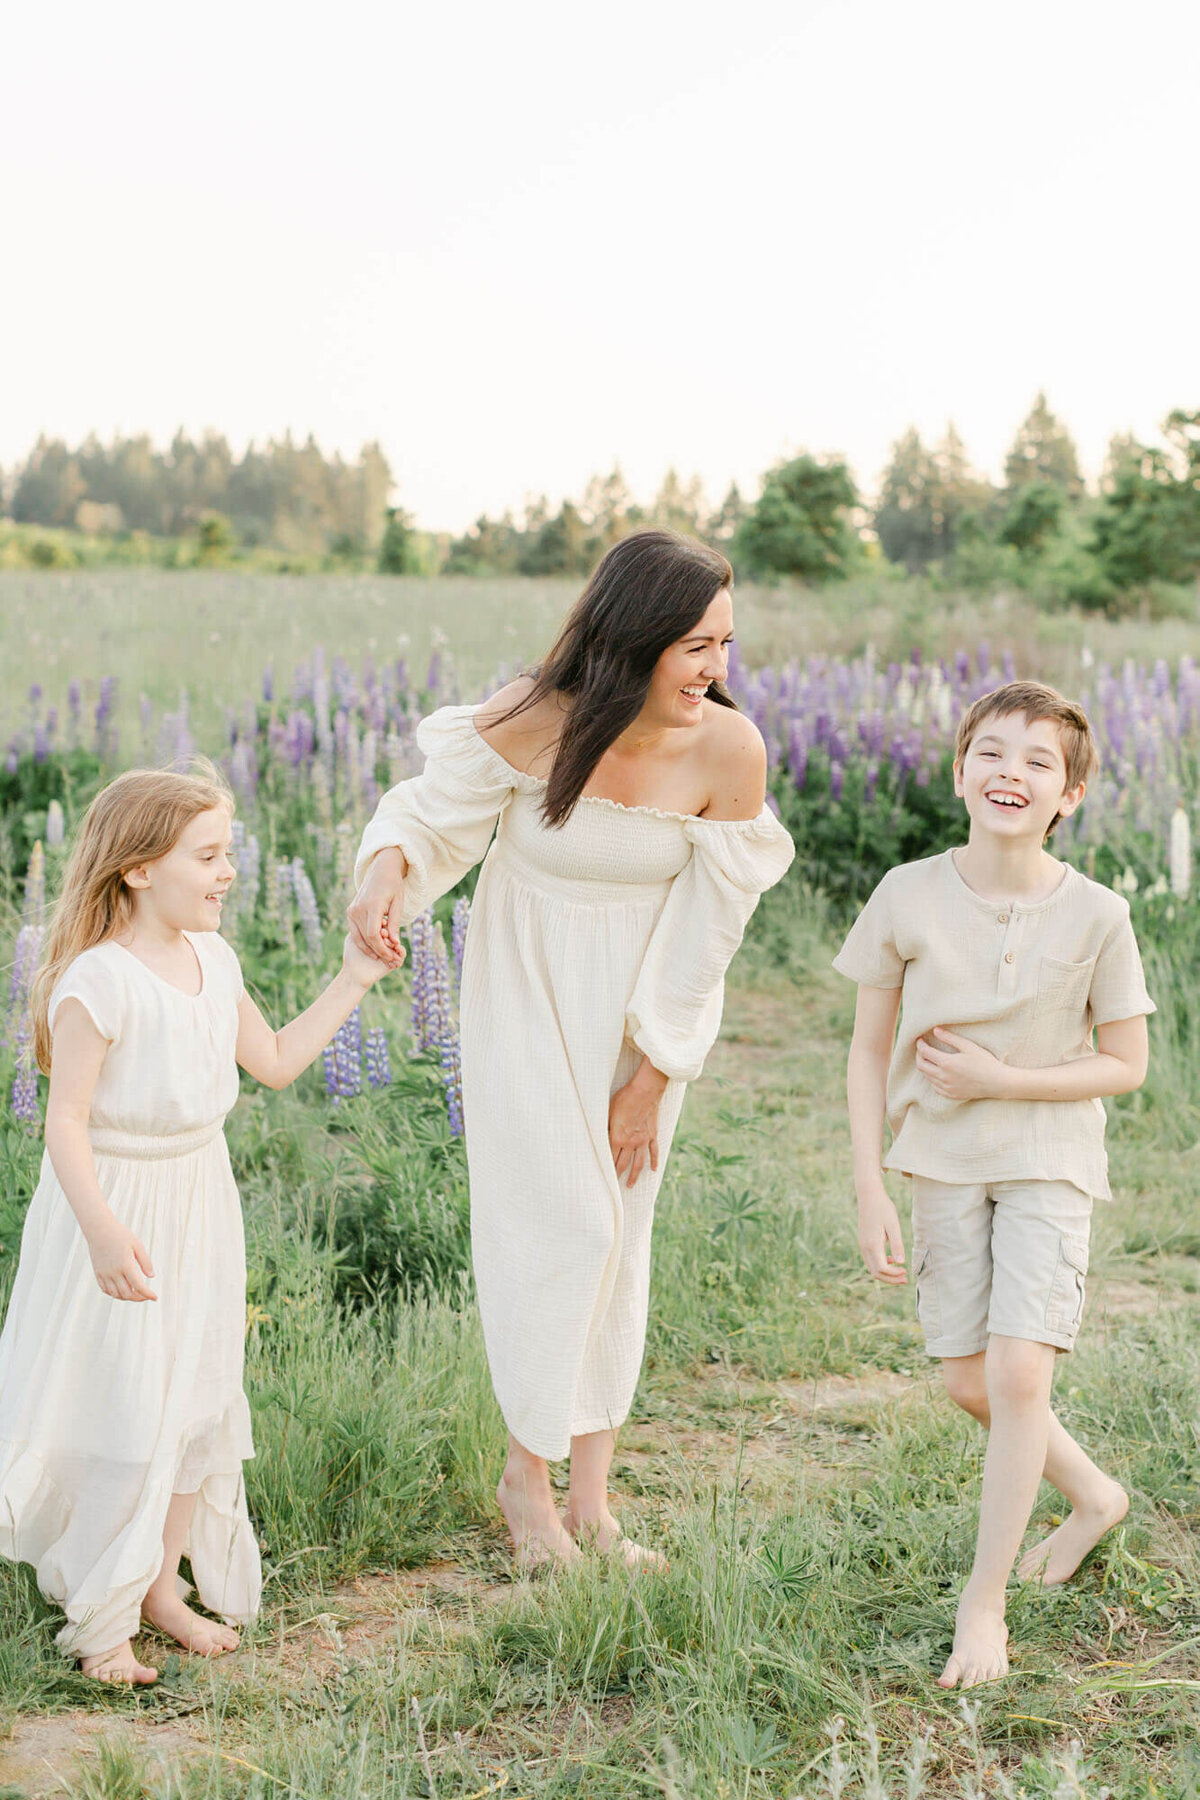 Gorgeous Mama in cream Nothing Fits But dress and long dark hair is out in a field of blue and purple wildflowers with her two children. They are all laughing together. Her kids are both dressed in light neutral tones and colors. She is looking at her son who is standing to her left and her daughter is holding her hand on her right.